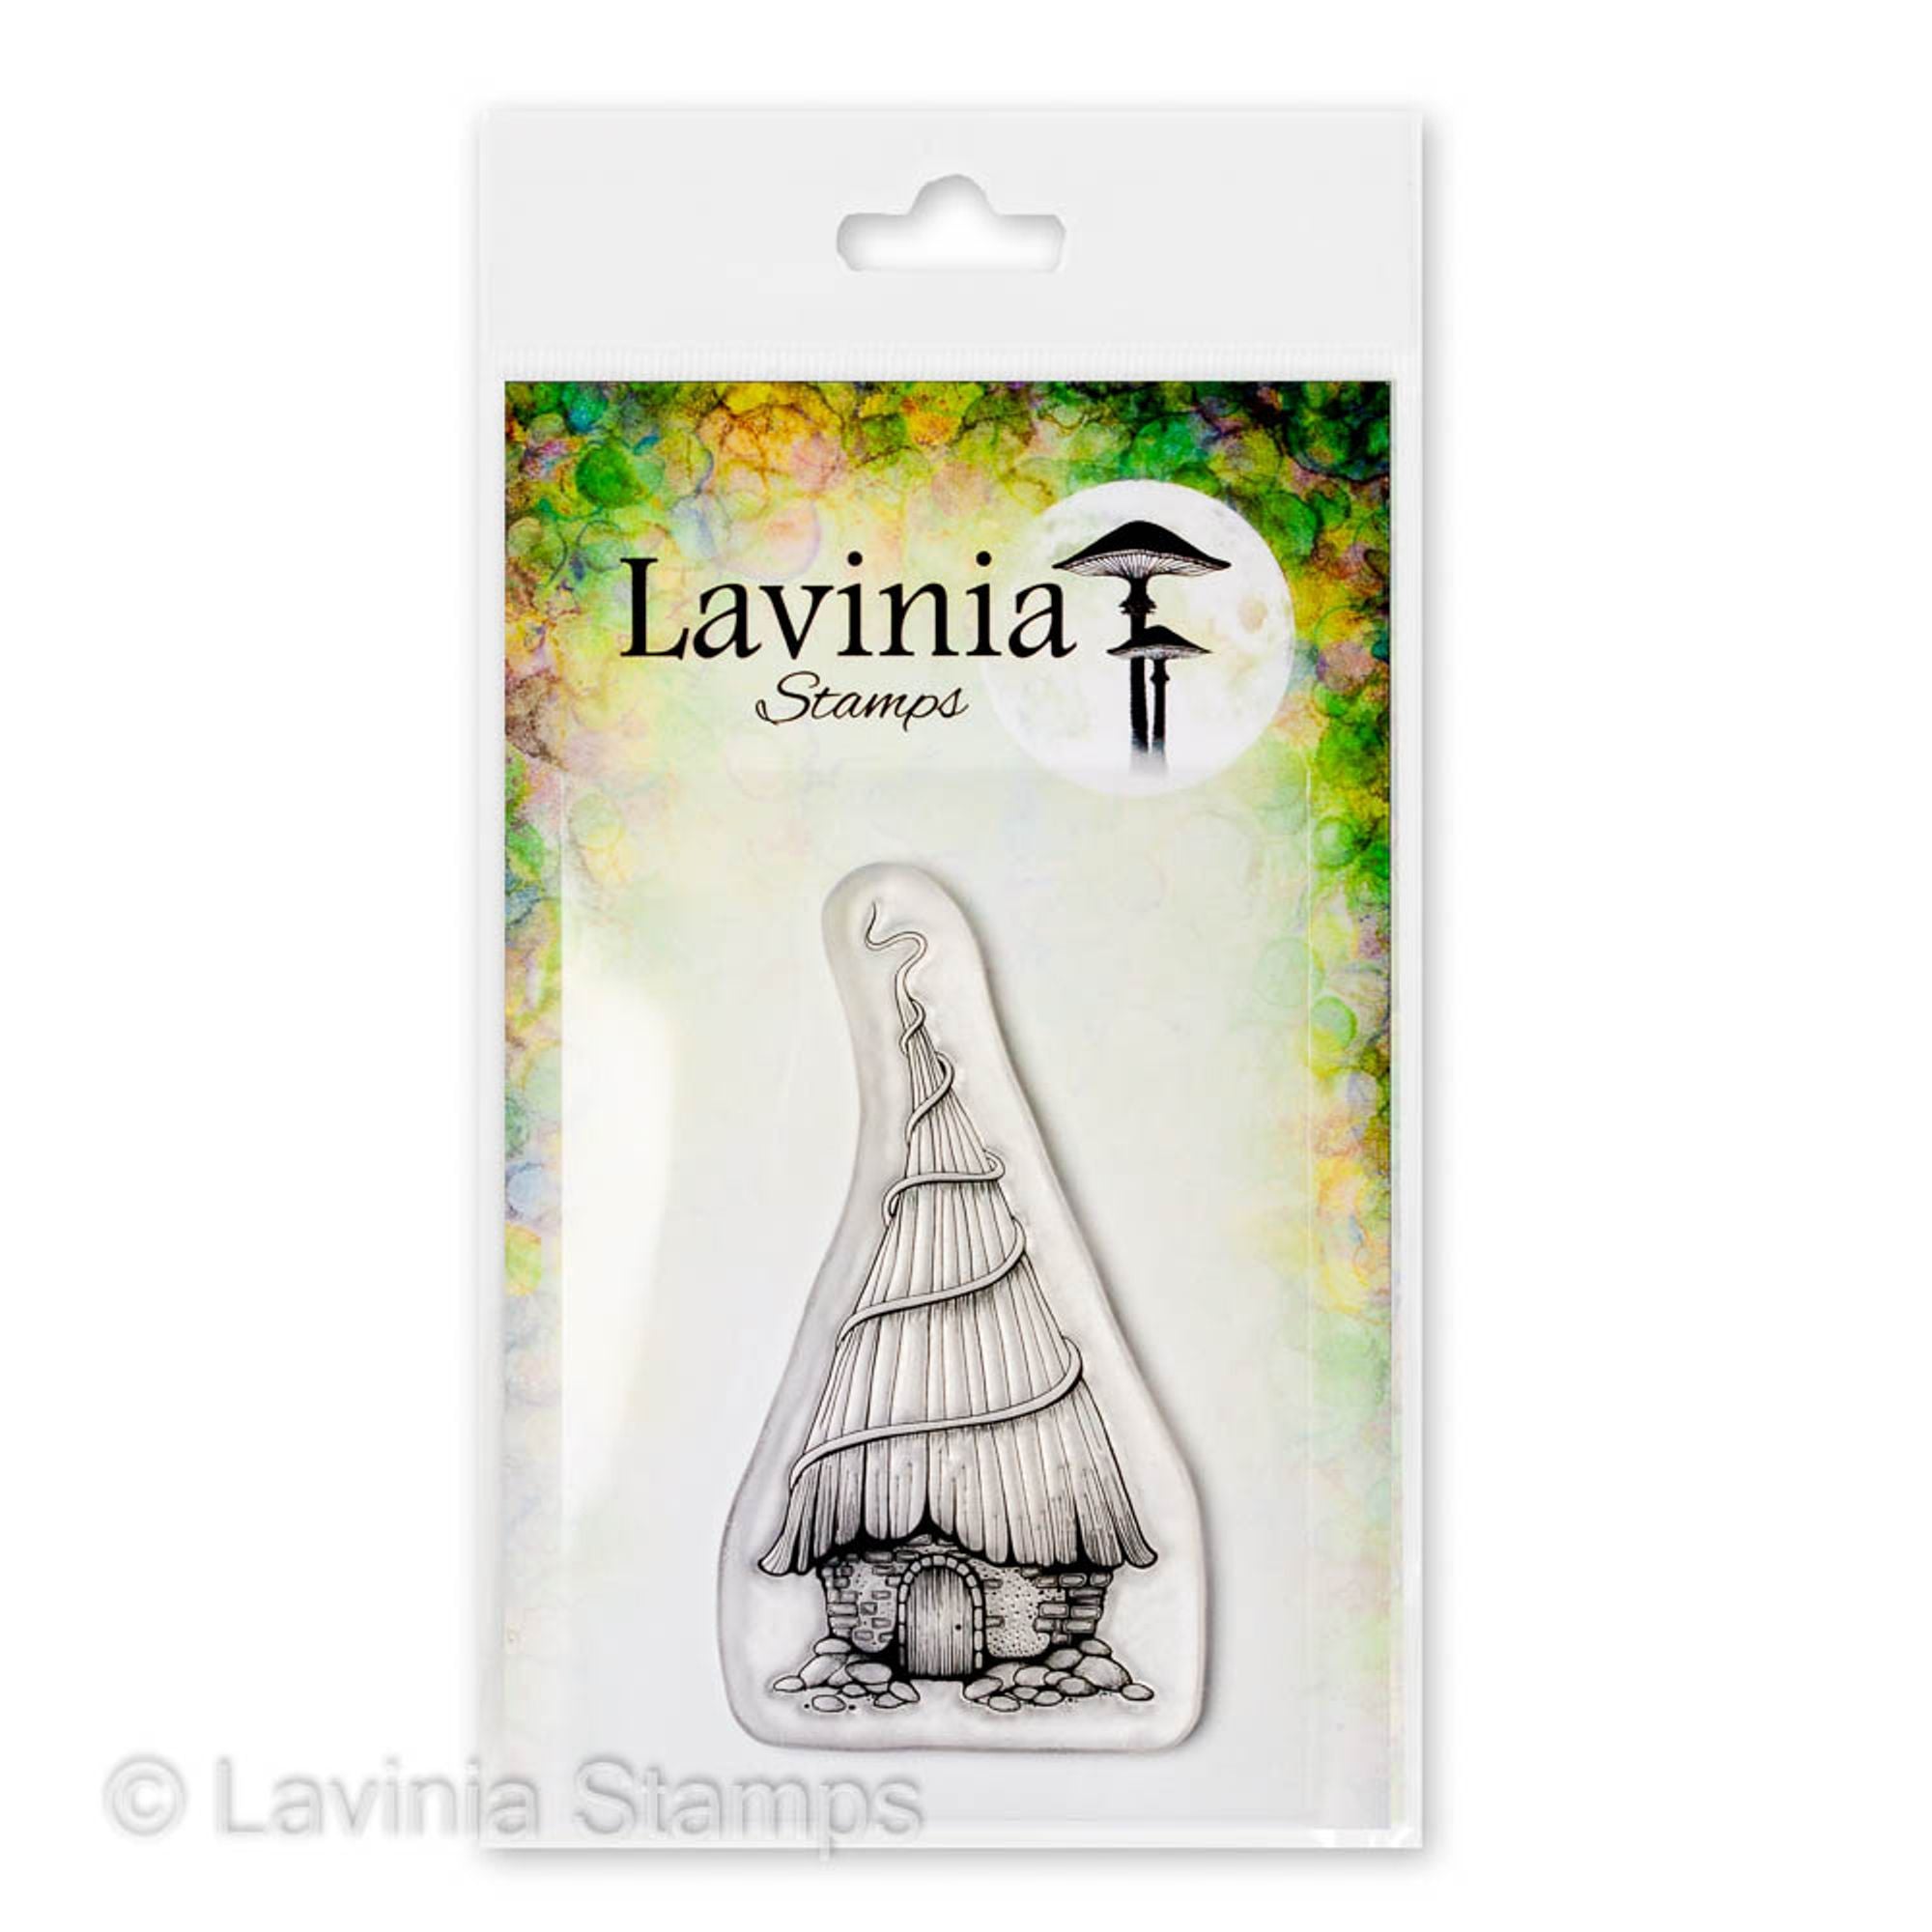 Lavinia Stamps Lavinia Stamp - Whimsical Whips Small - 20456034